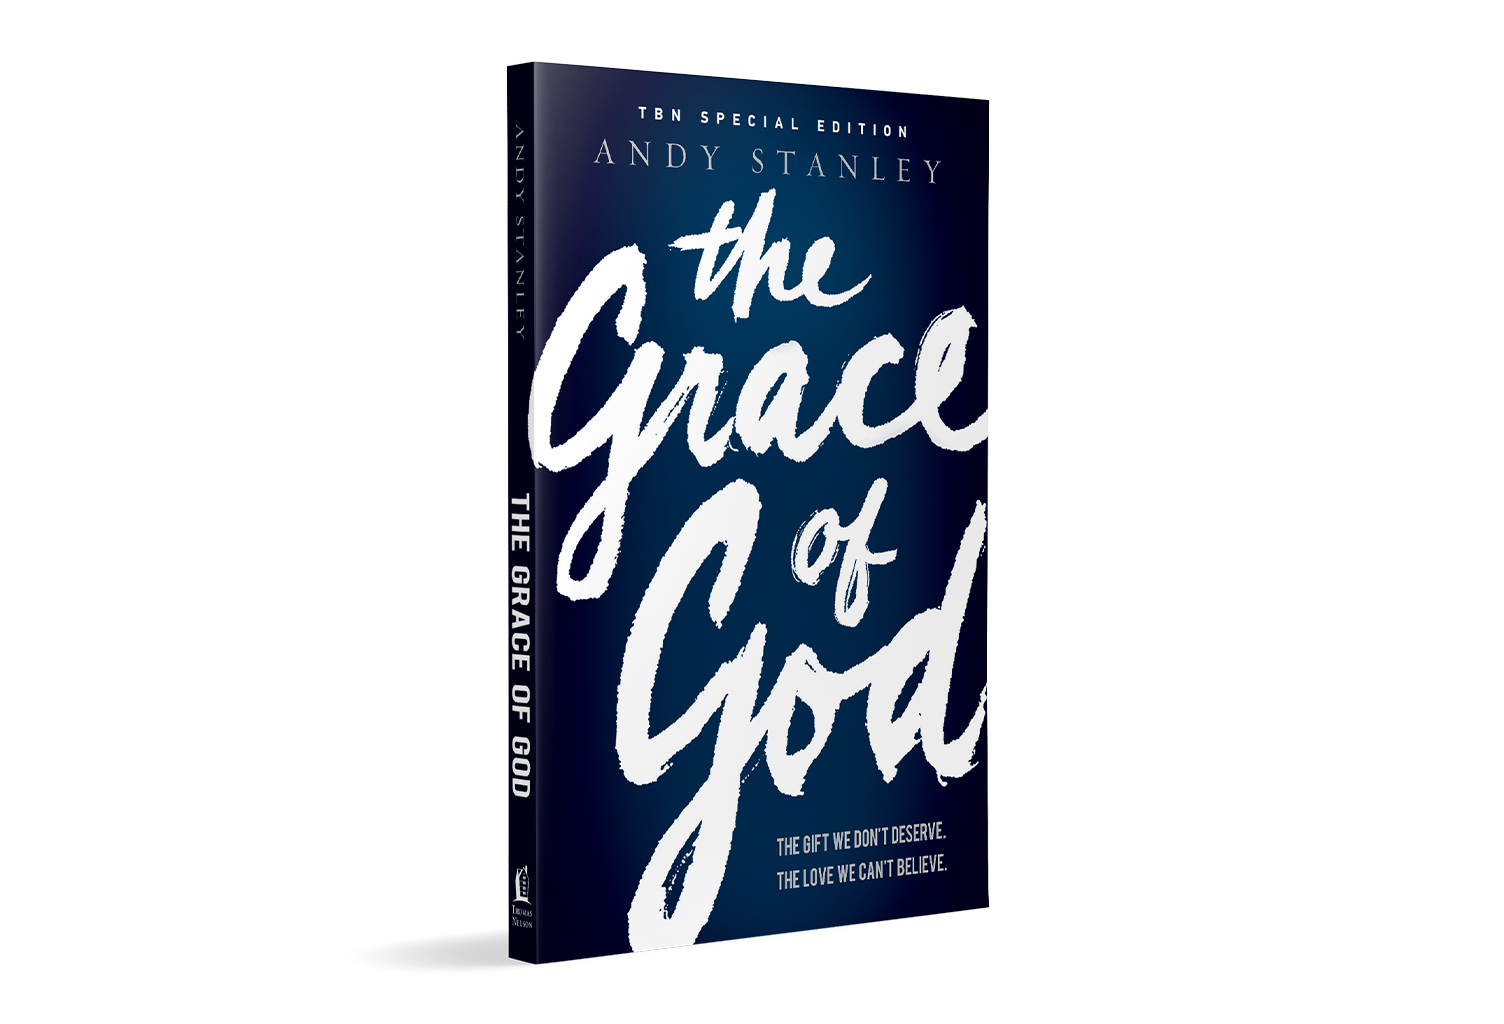 The Grace of God by Andy Stanley on TBN